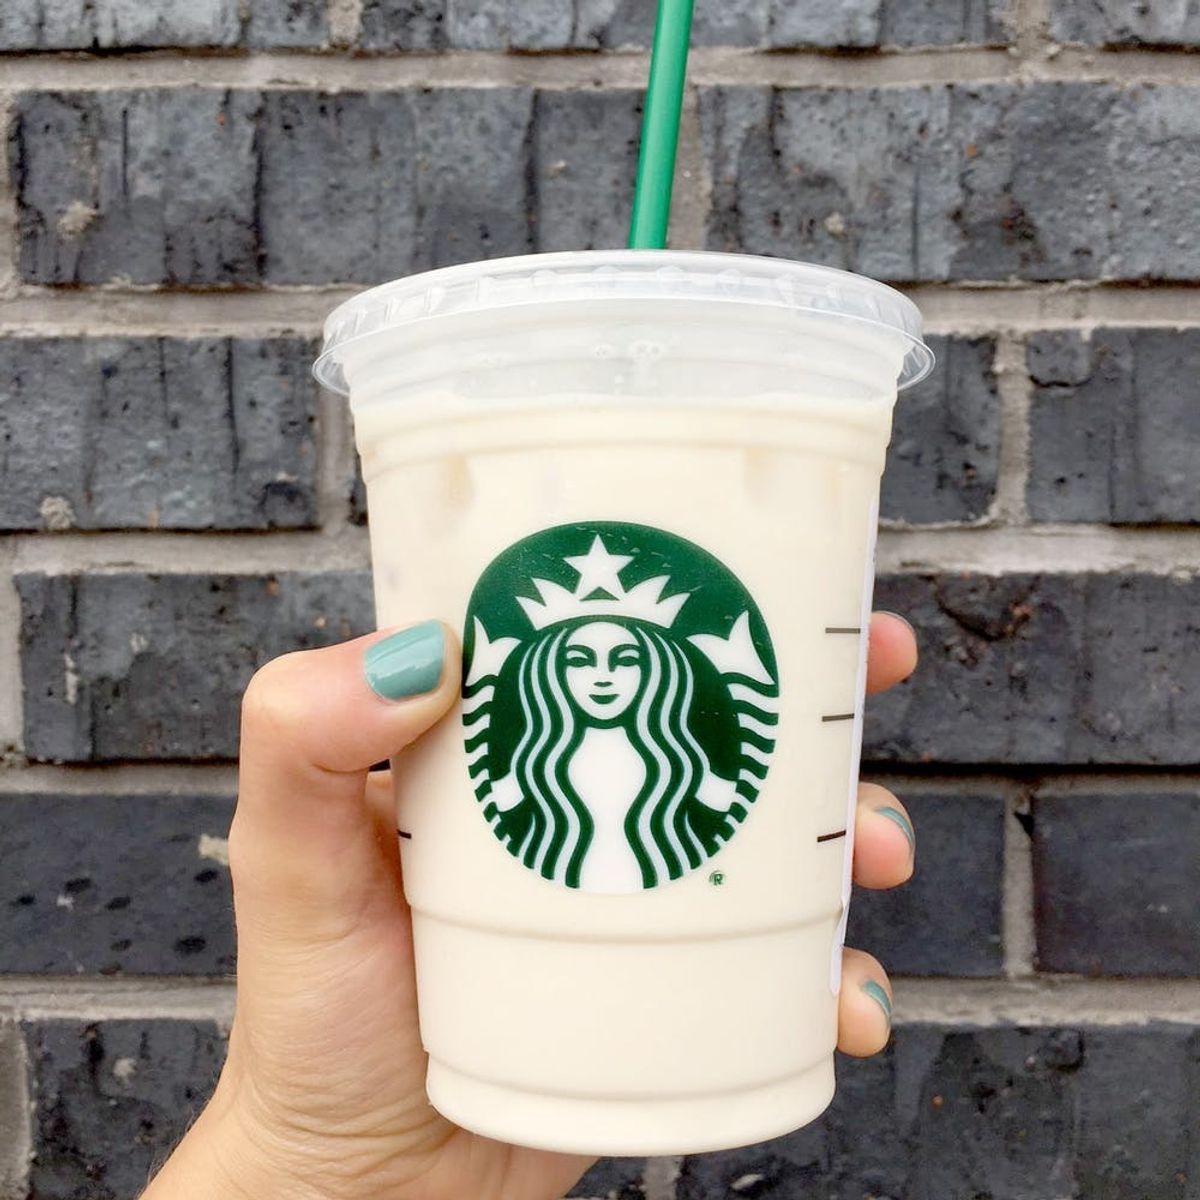 We Tried the Starbucks Keto White Drink Off the Secret Menu and We Don’t Hate It